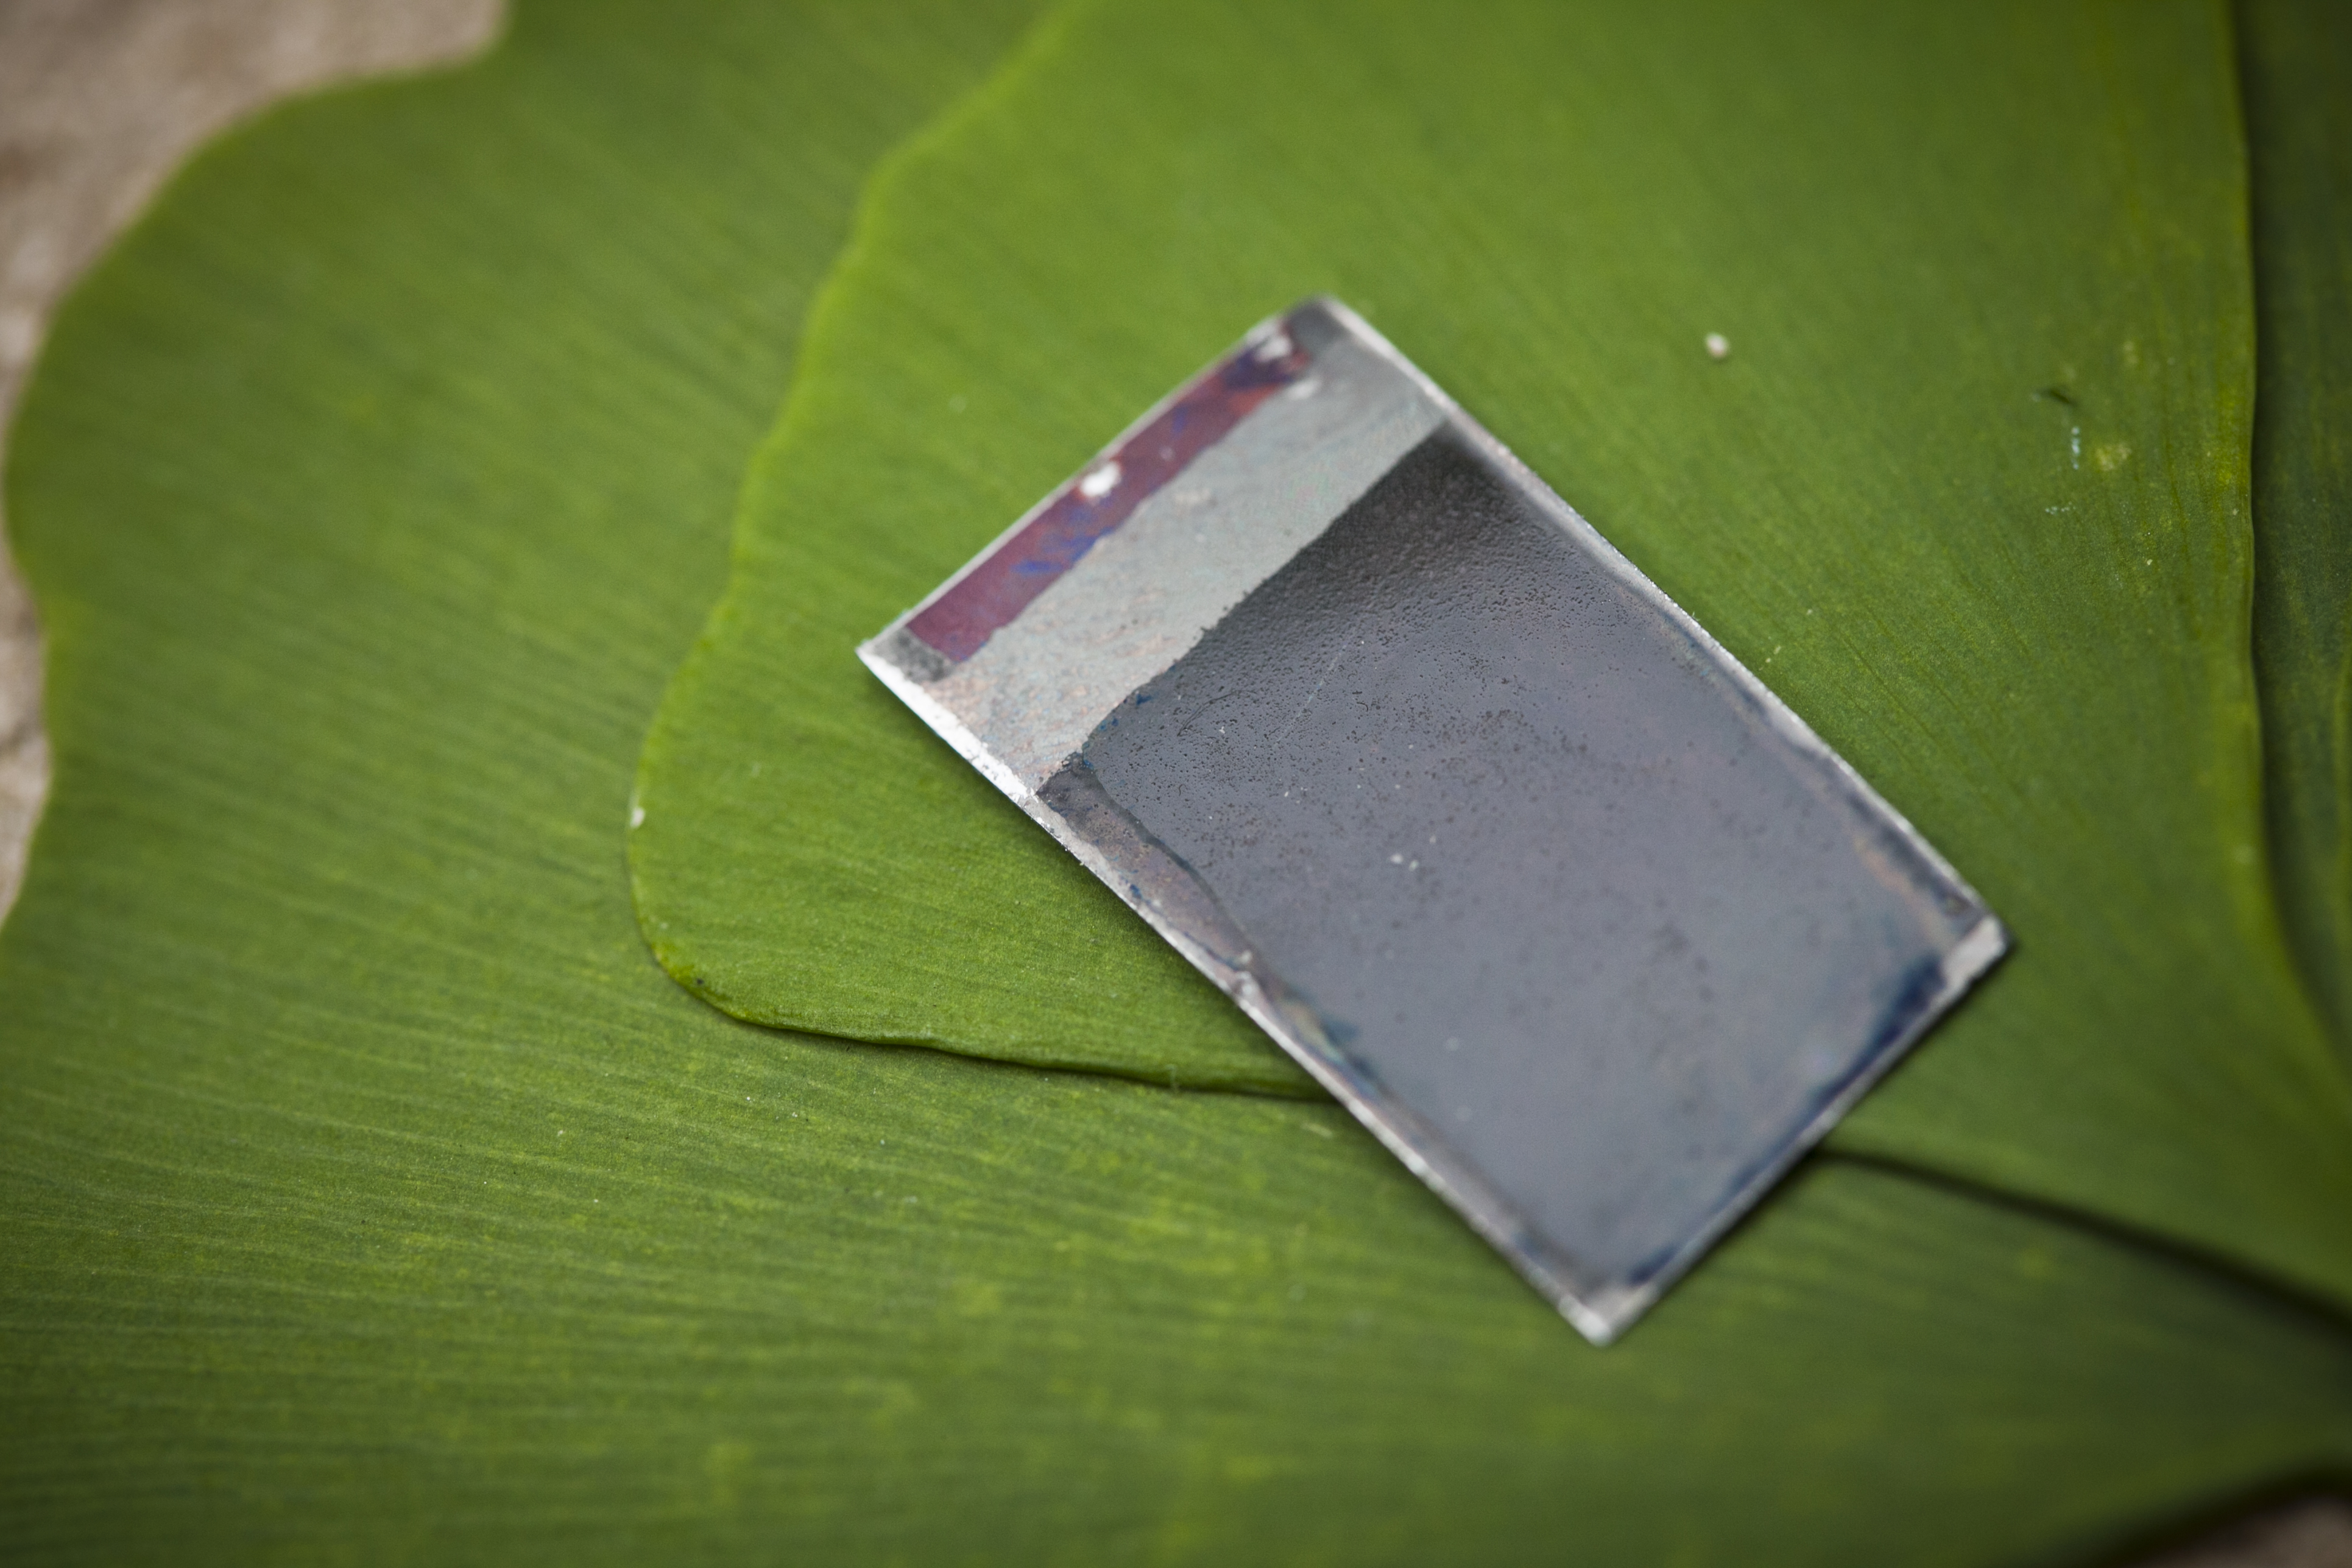 Can Artificial Leaf Solve Impending Power Crisis?